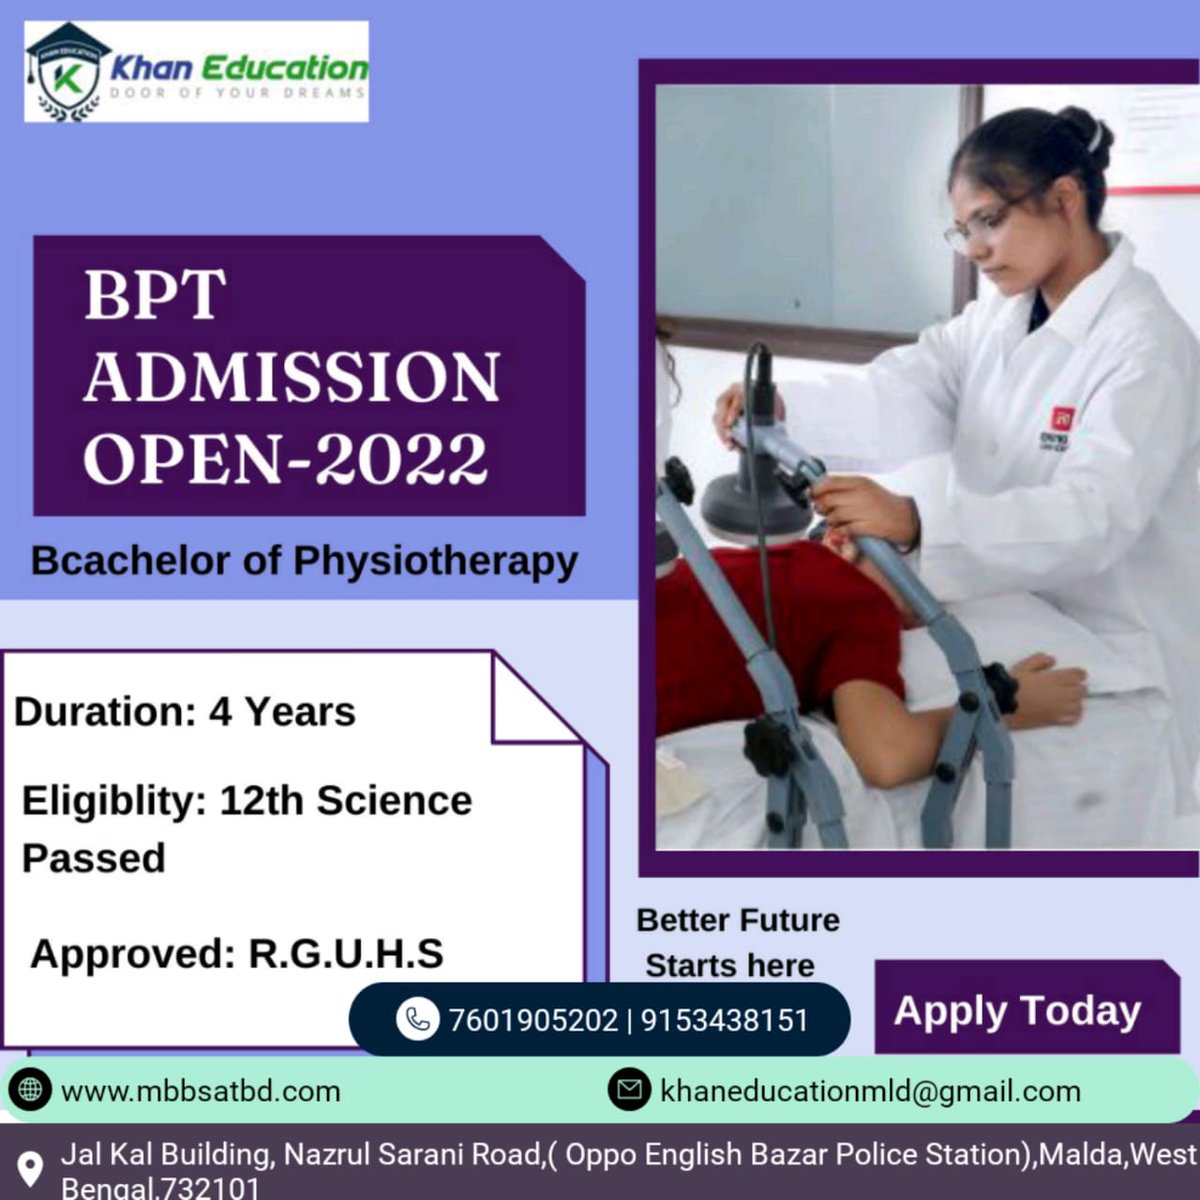 Bachelor of Physiotherapy 2022 (Admission Open)
For Inquiry No:-
(+91) 7601905202
Helpline No :-
(+91) 9153438151
khaneducation.in
khaneducational@gmail.com
#bachelorphysiotherapy
#bsccriticalcare
#bscdatascience
#AdmissionConsultan